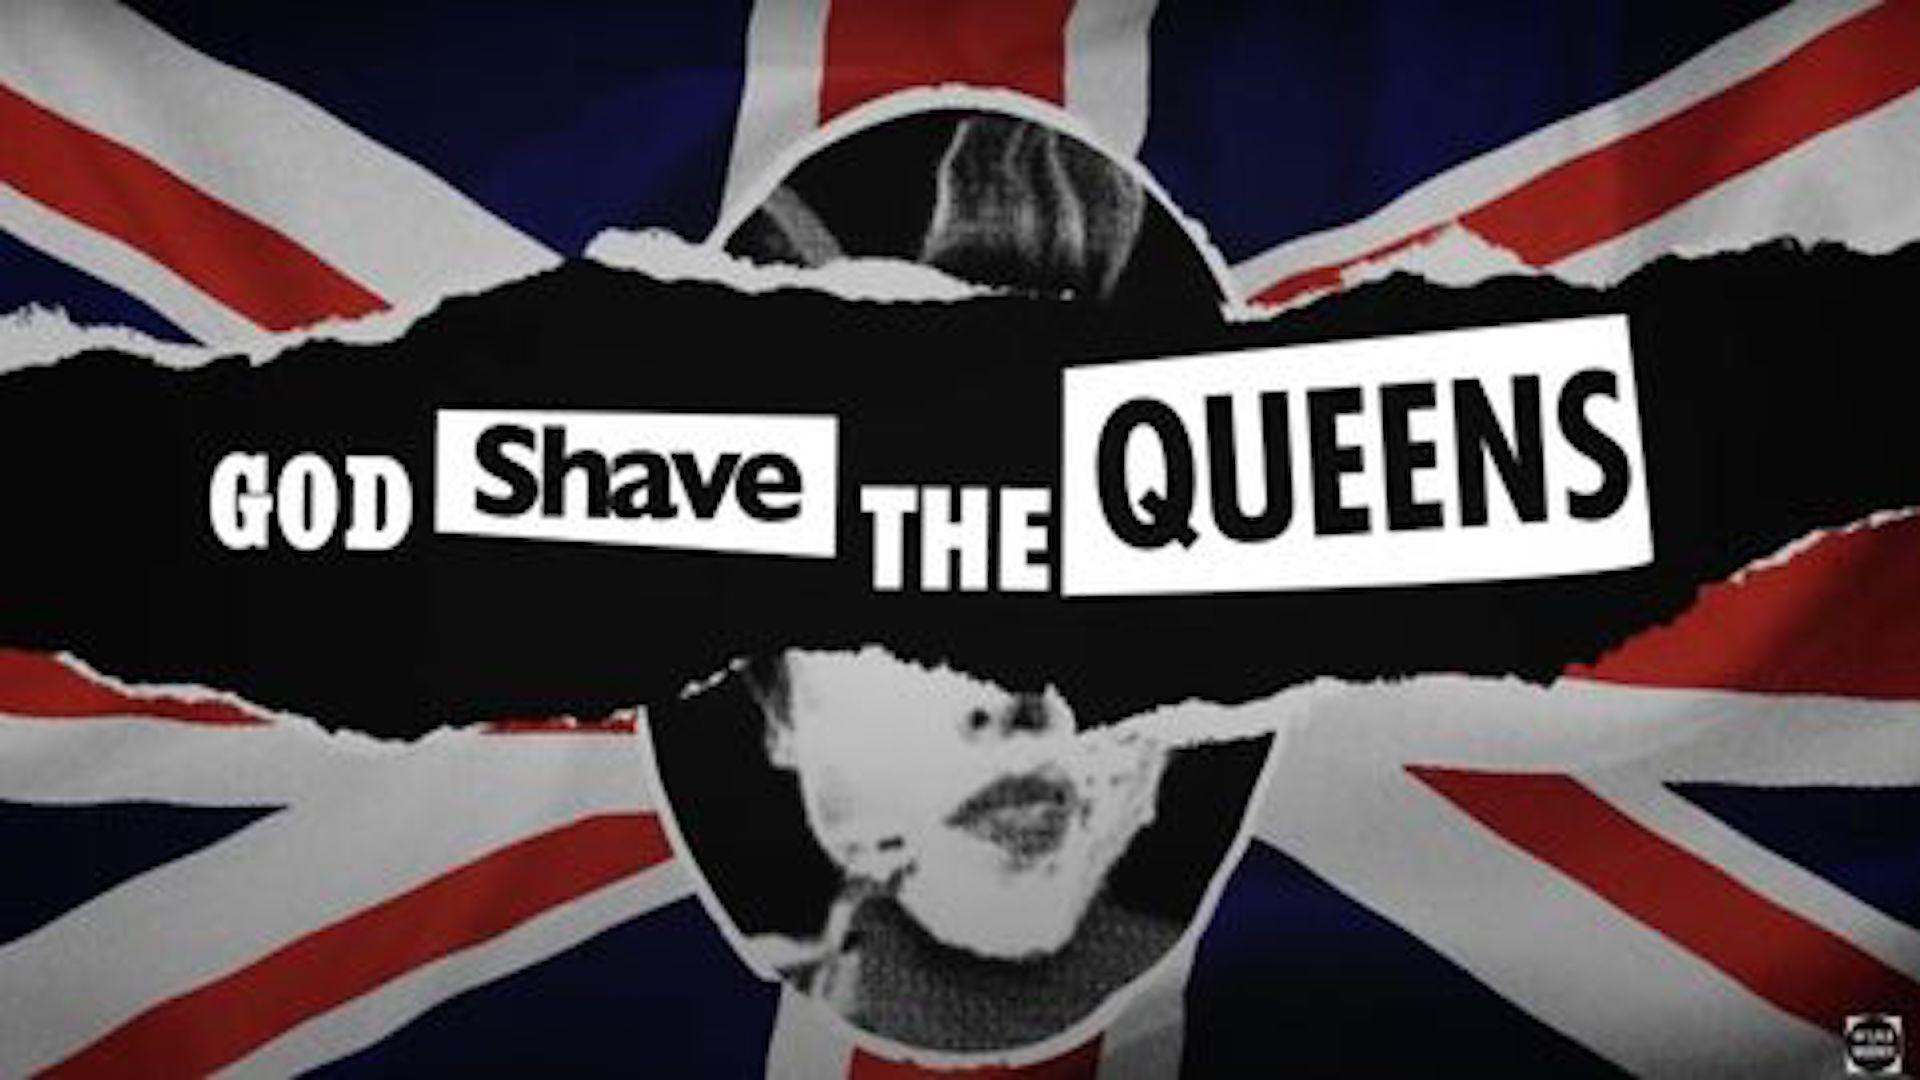 God Shave the Queens